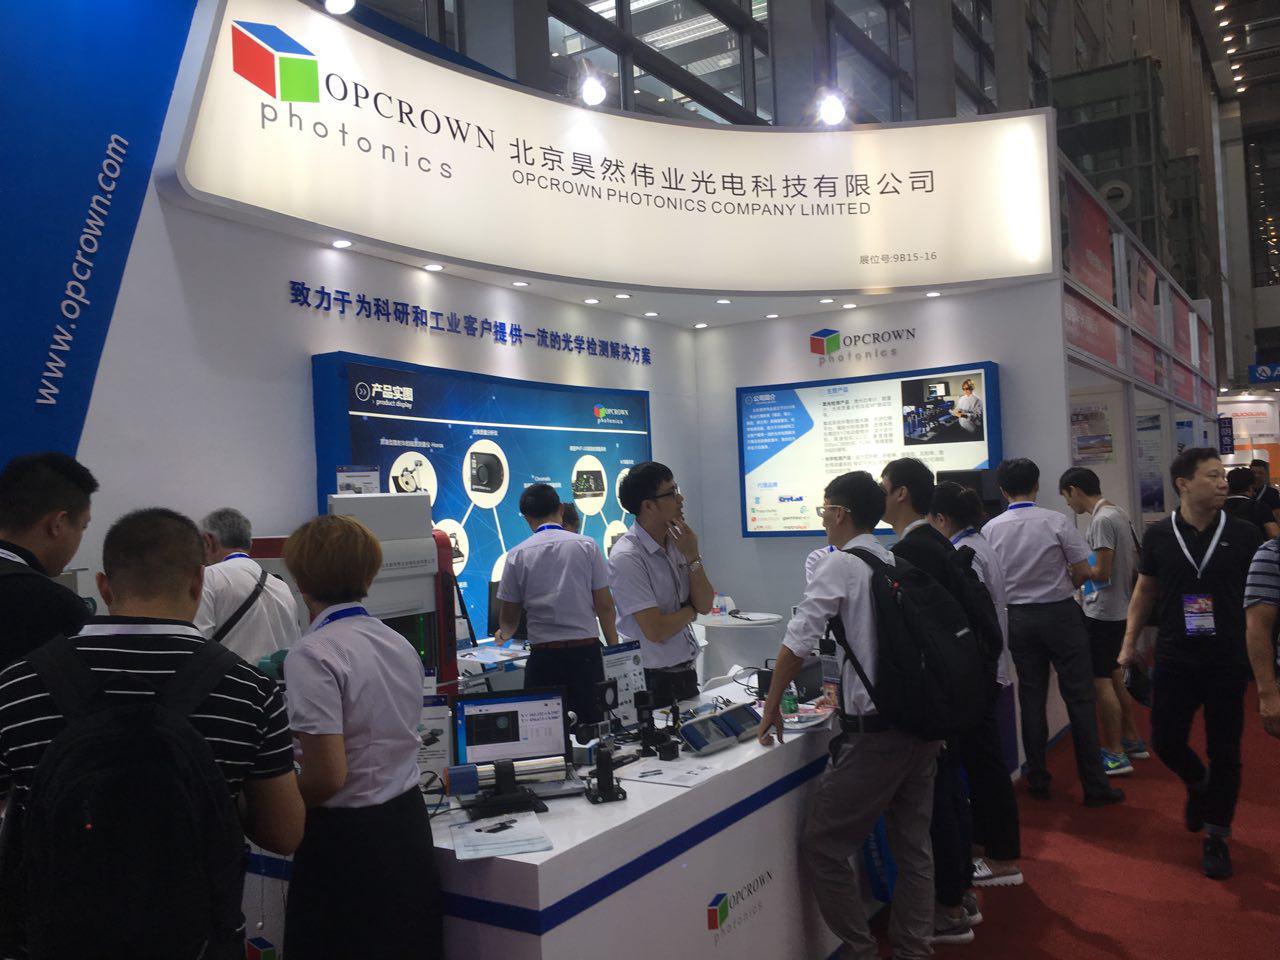 Visit our distributor OPCROWN PHOTONICS COMPANY LIMITED at CIOE 2018 in Shenzhen